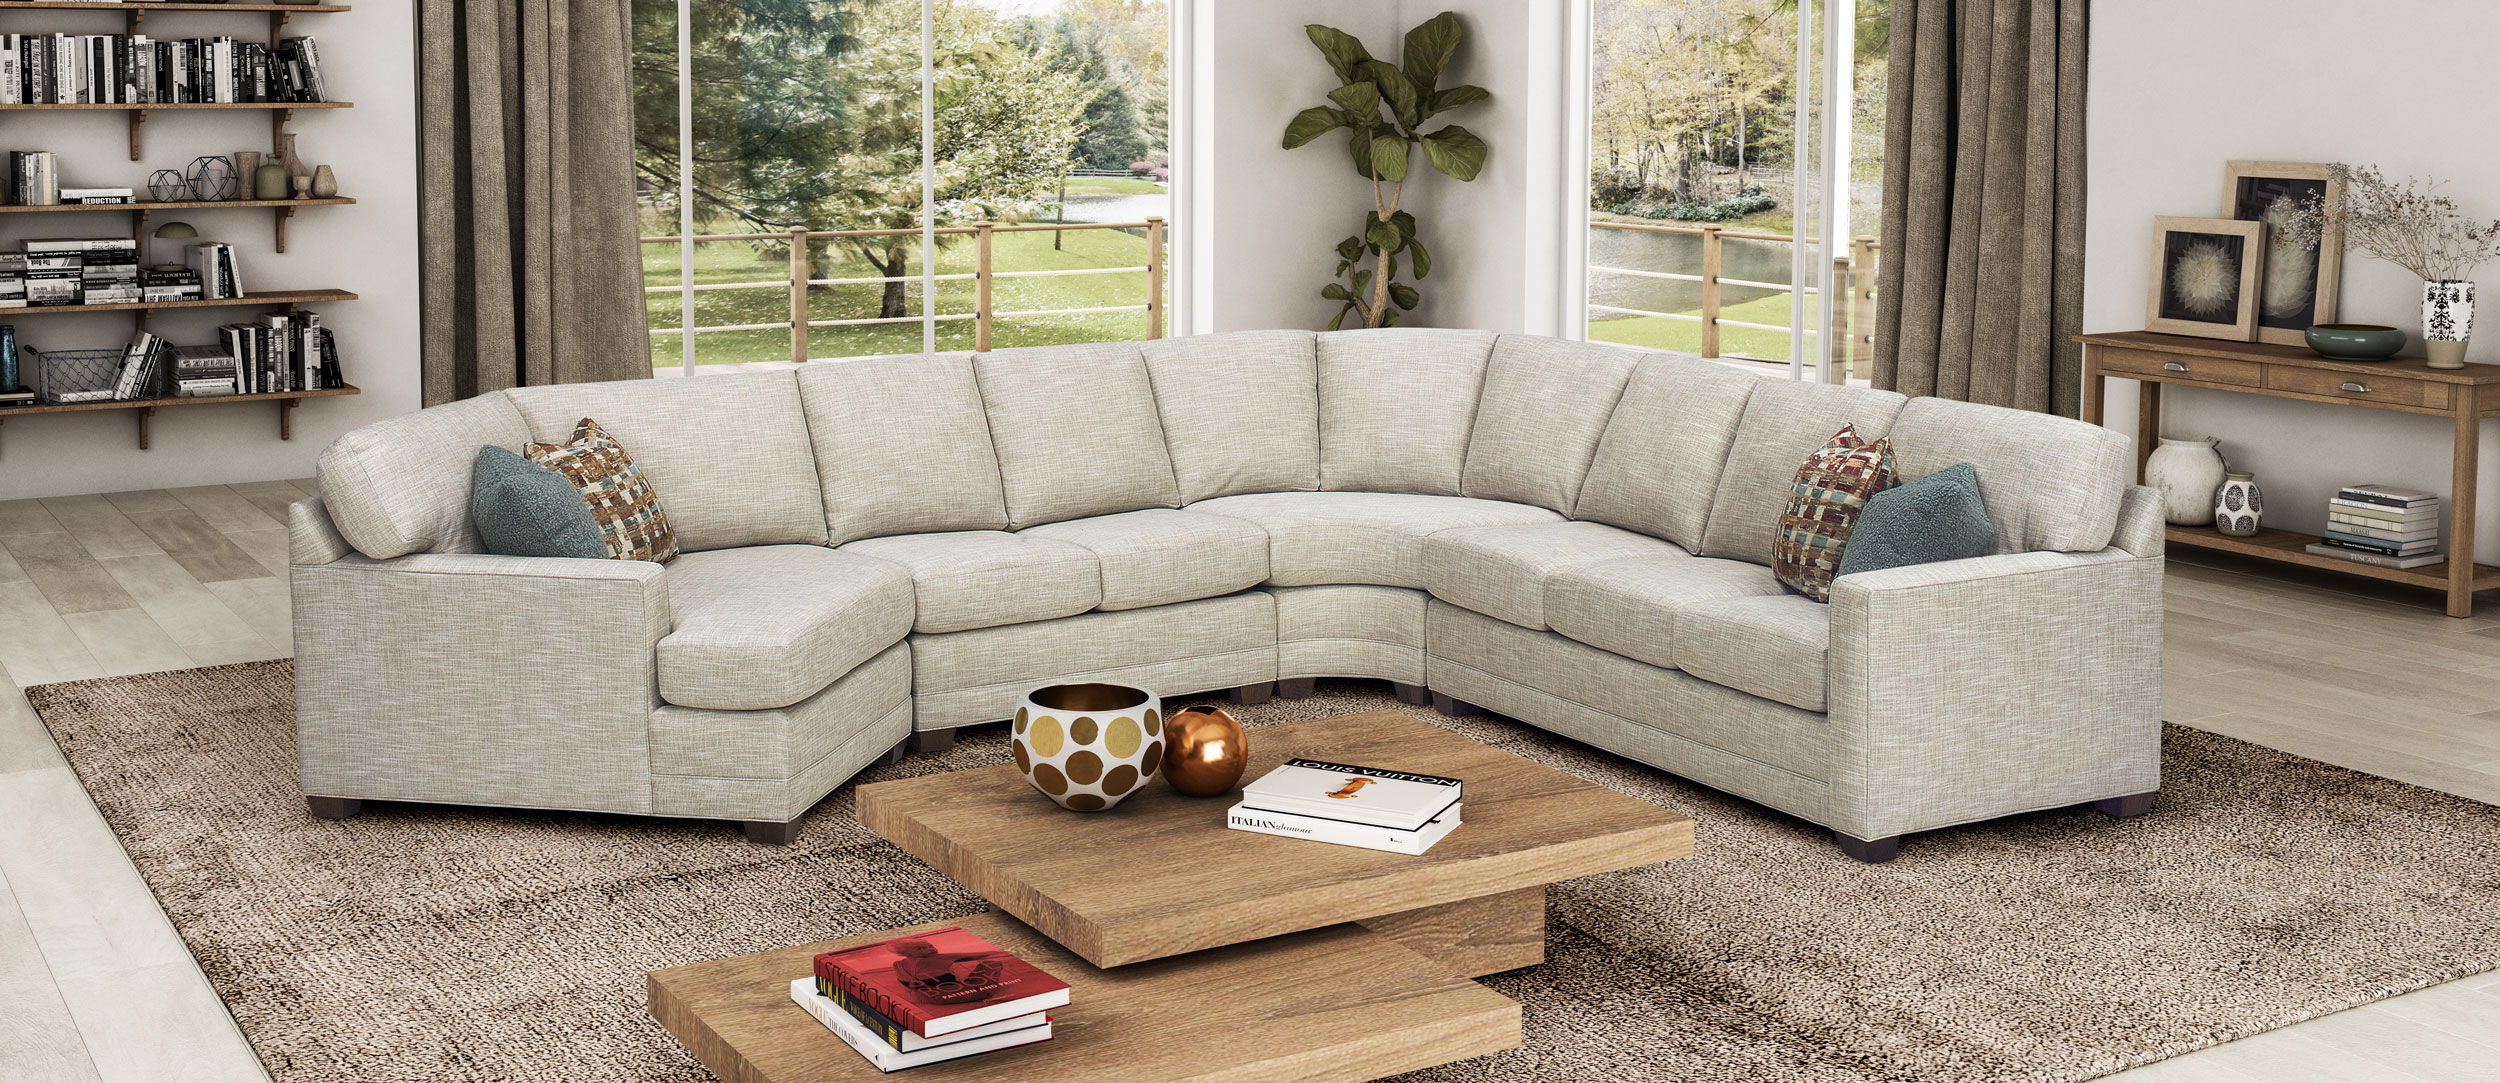 Temple sectional